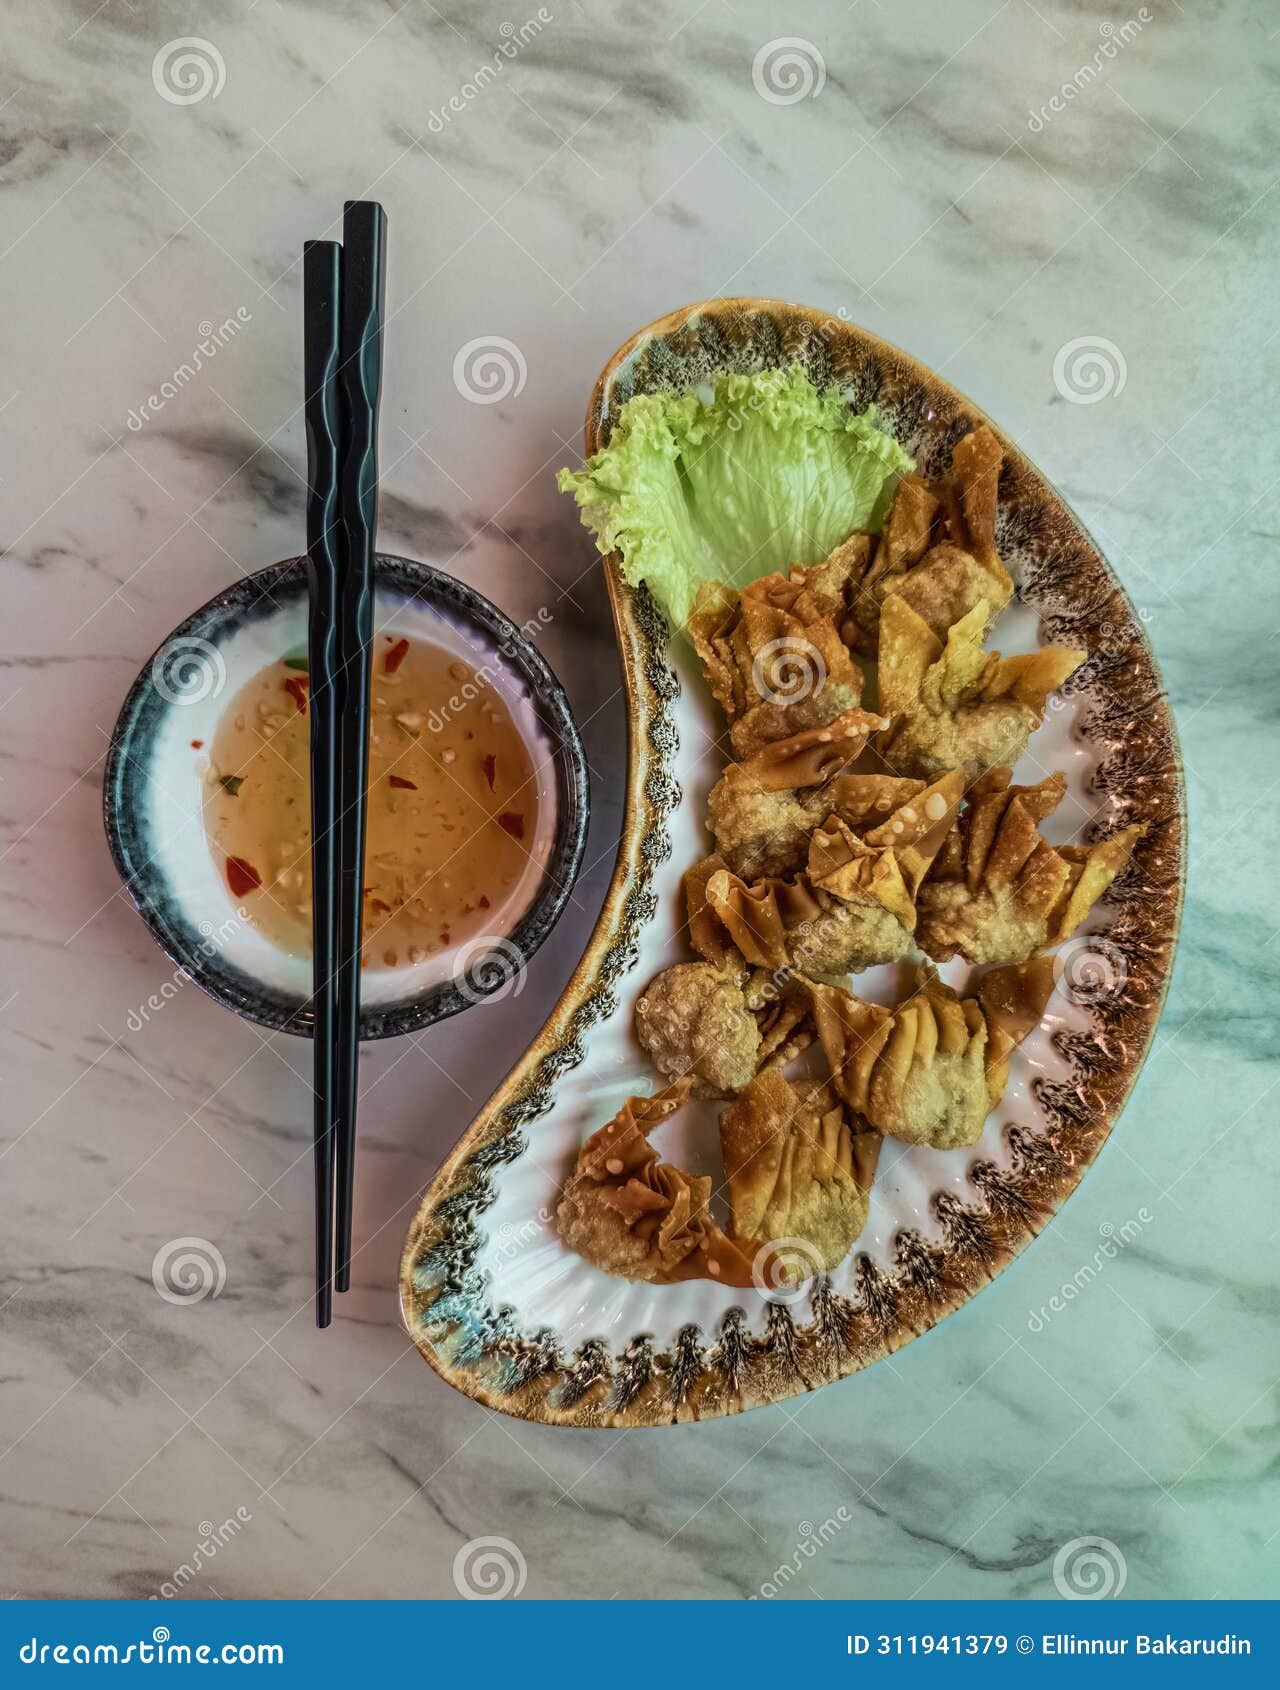 fried wantan served on the plate together with the dipping sauce and a pair of chopsticks. top view